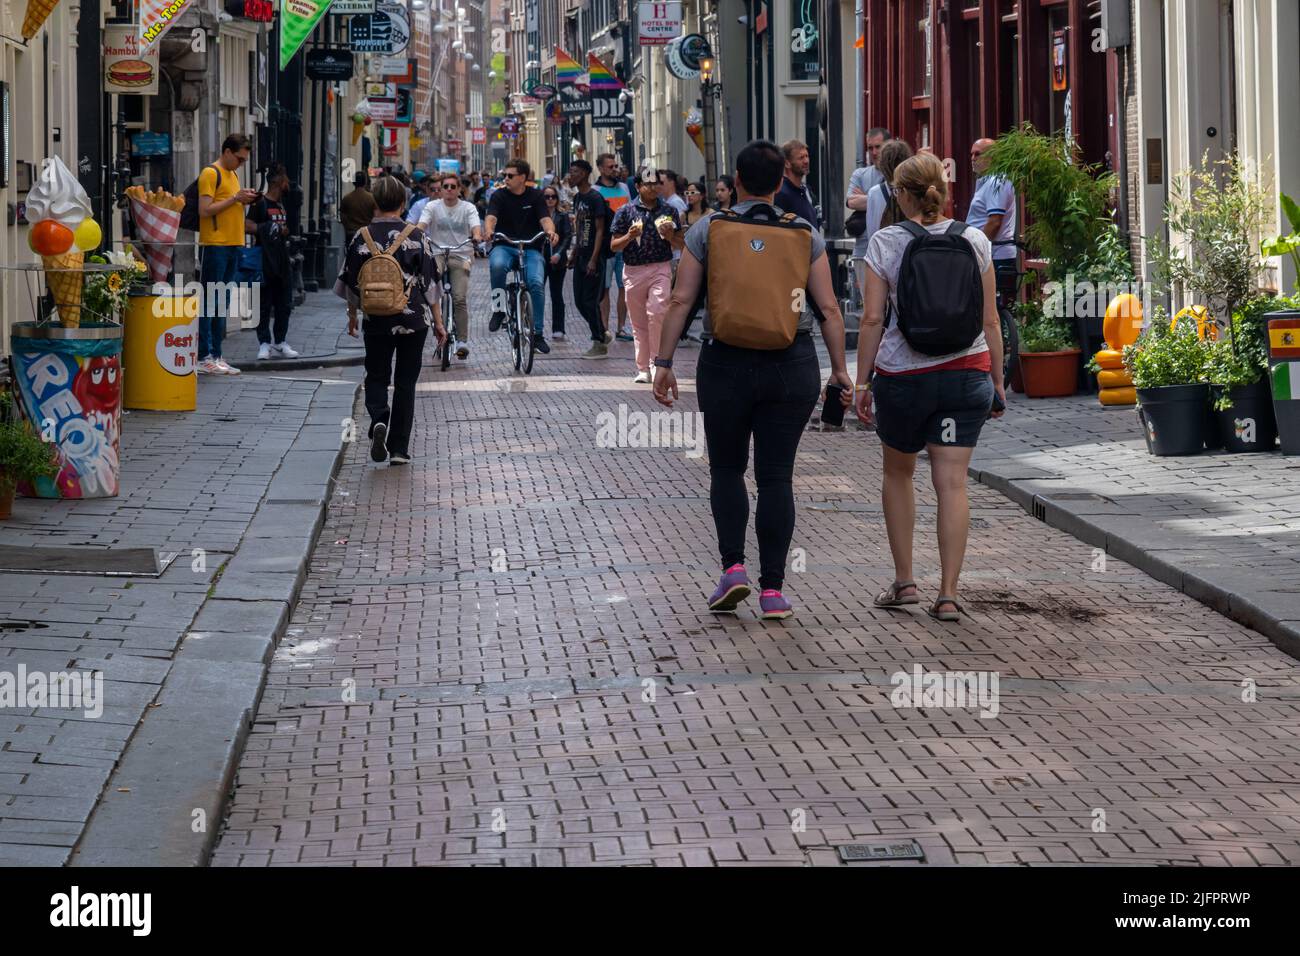 Amsterdam, The Netherlands - 21 June 2022: People walking on narrow street with many stores Stock Photo